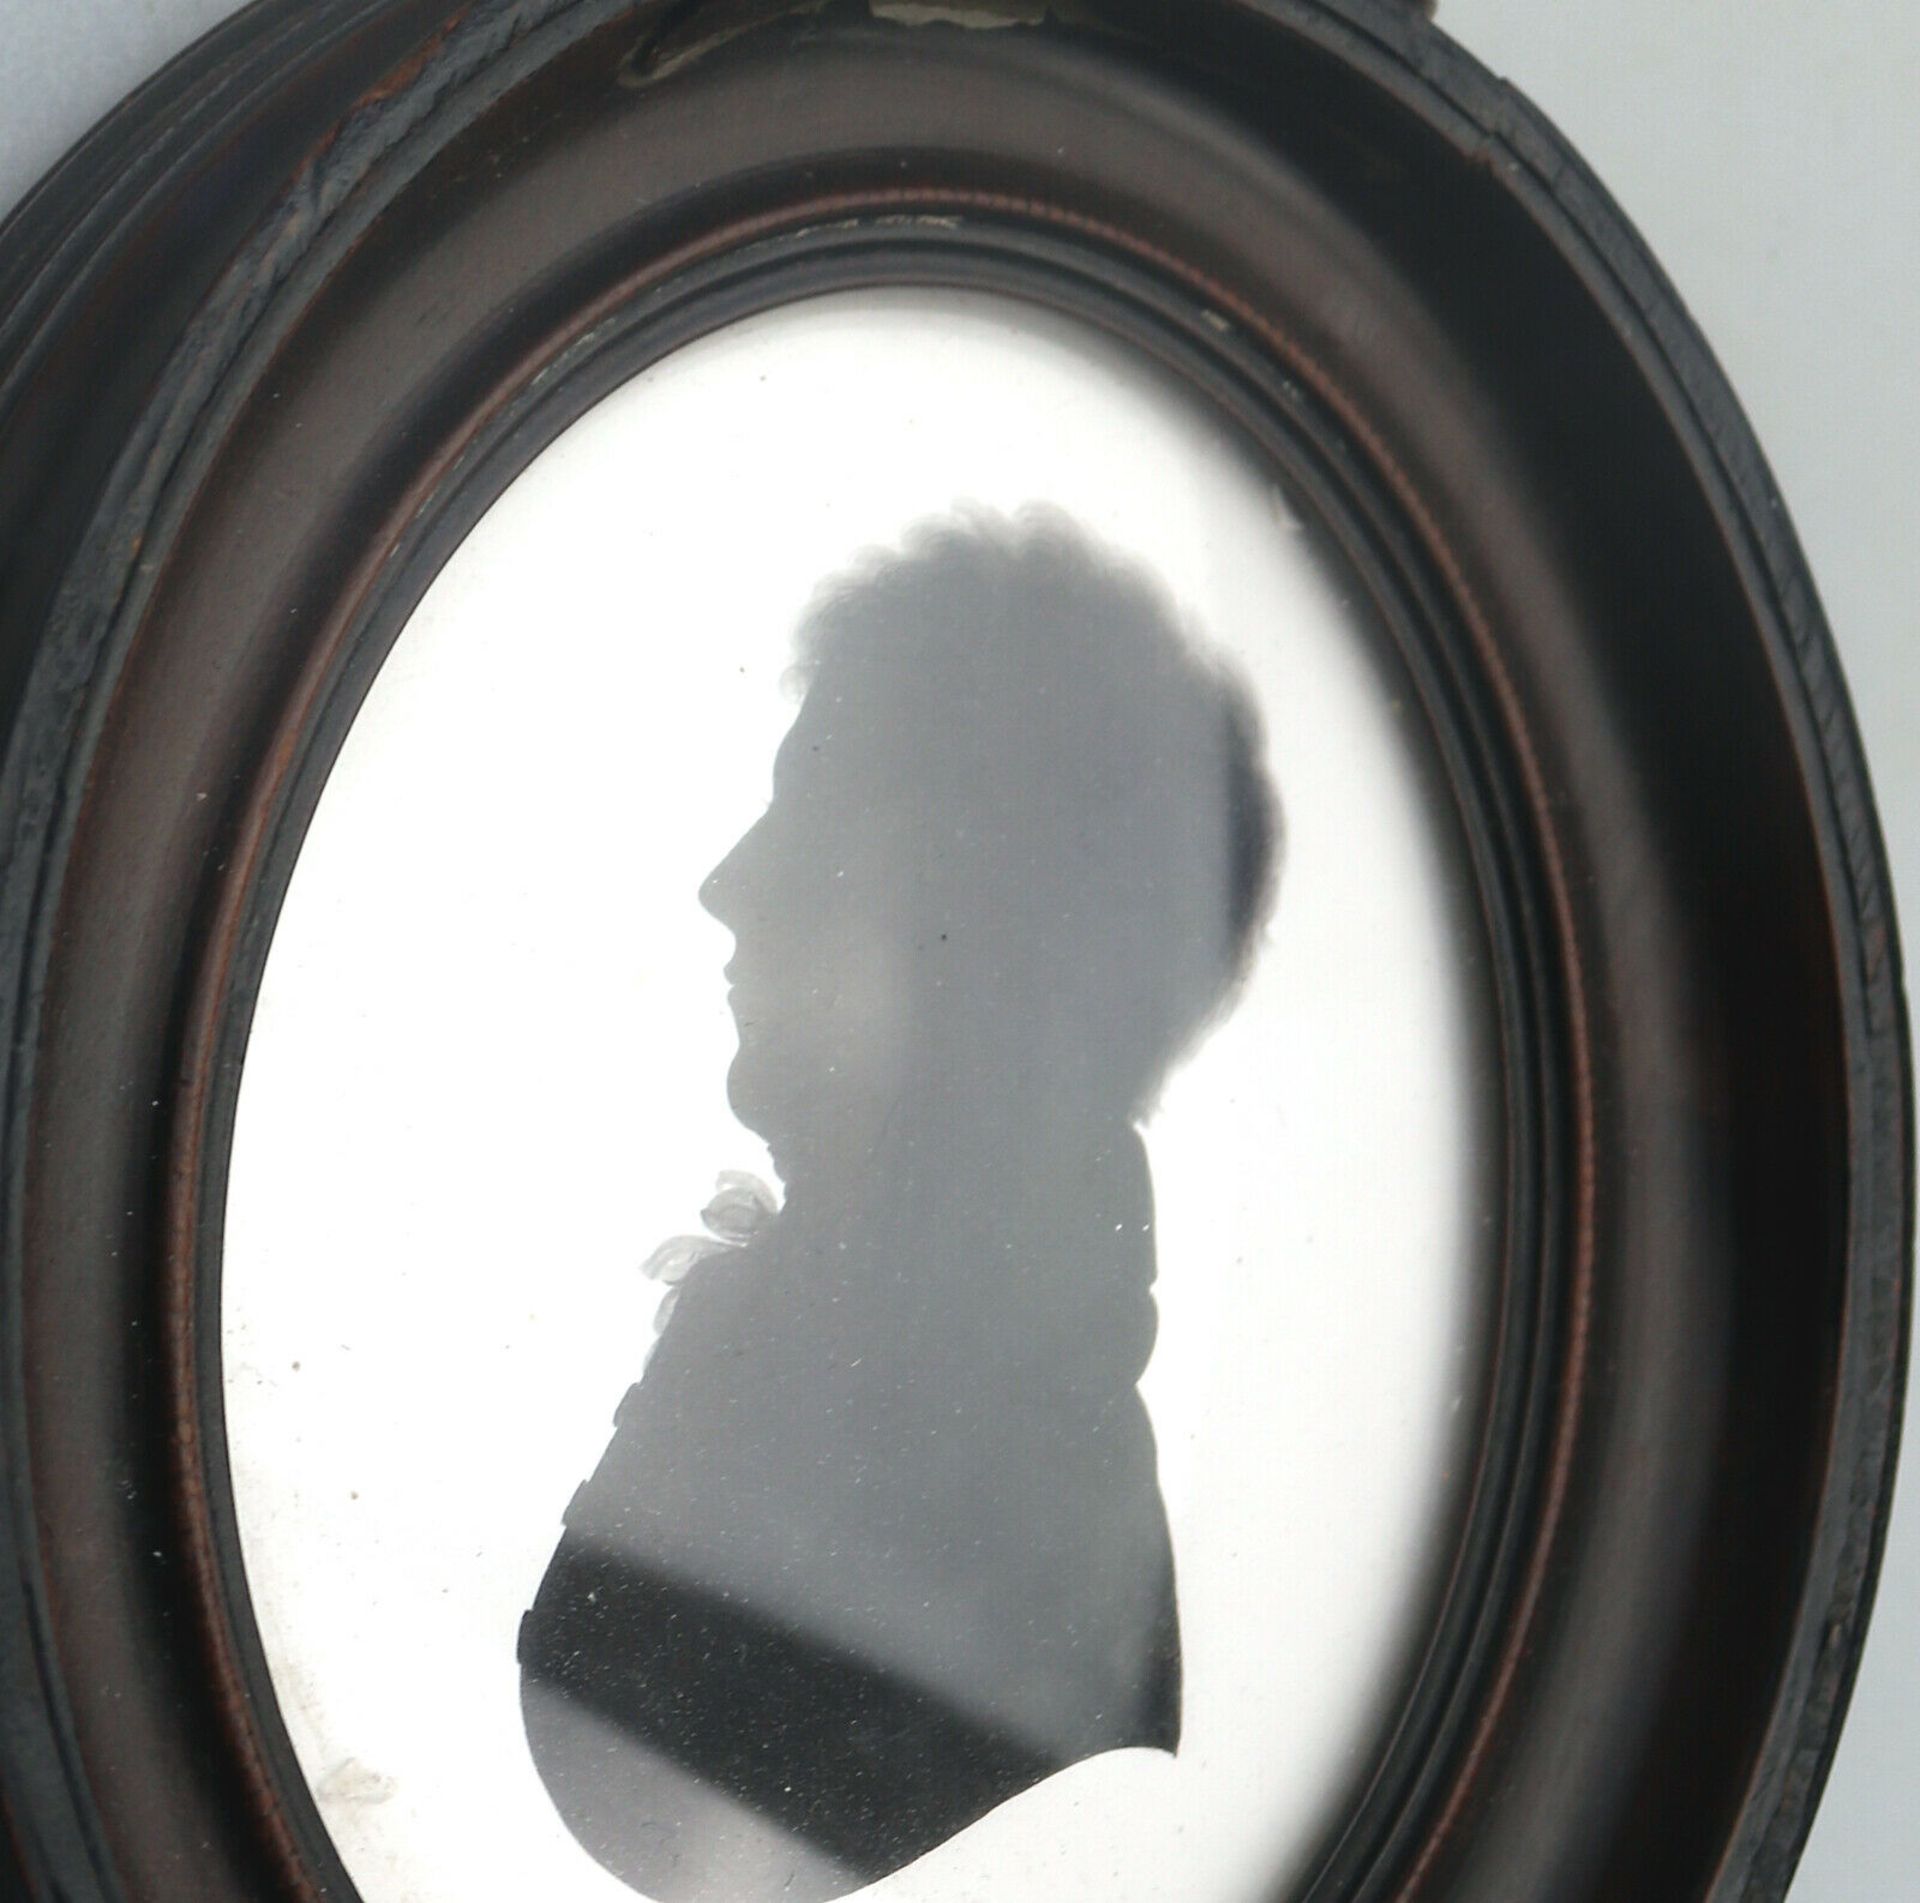 Georgian Silhouette attributed John Miers Portrait - 1 19thC - Image 2 of 4